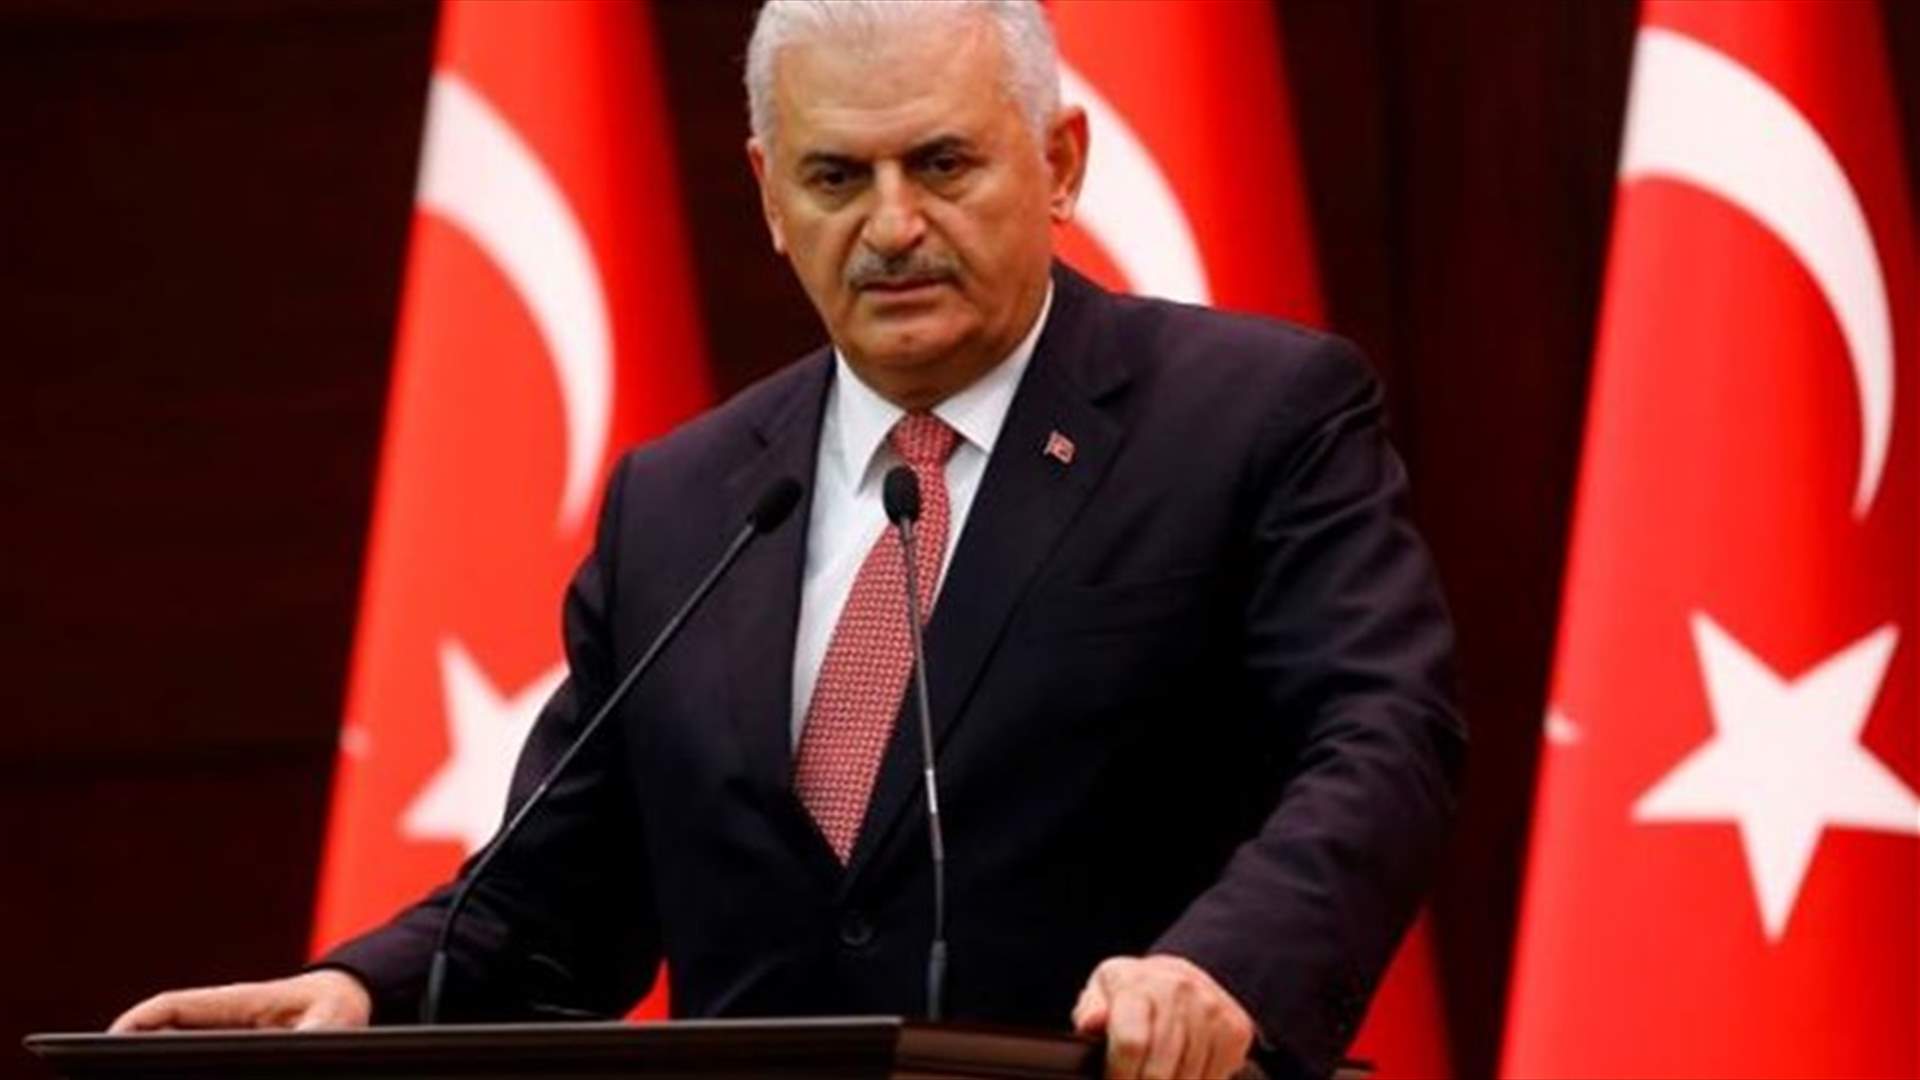 Turkey PM says aims to develop relations with Syria, Iraq